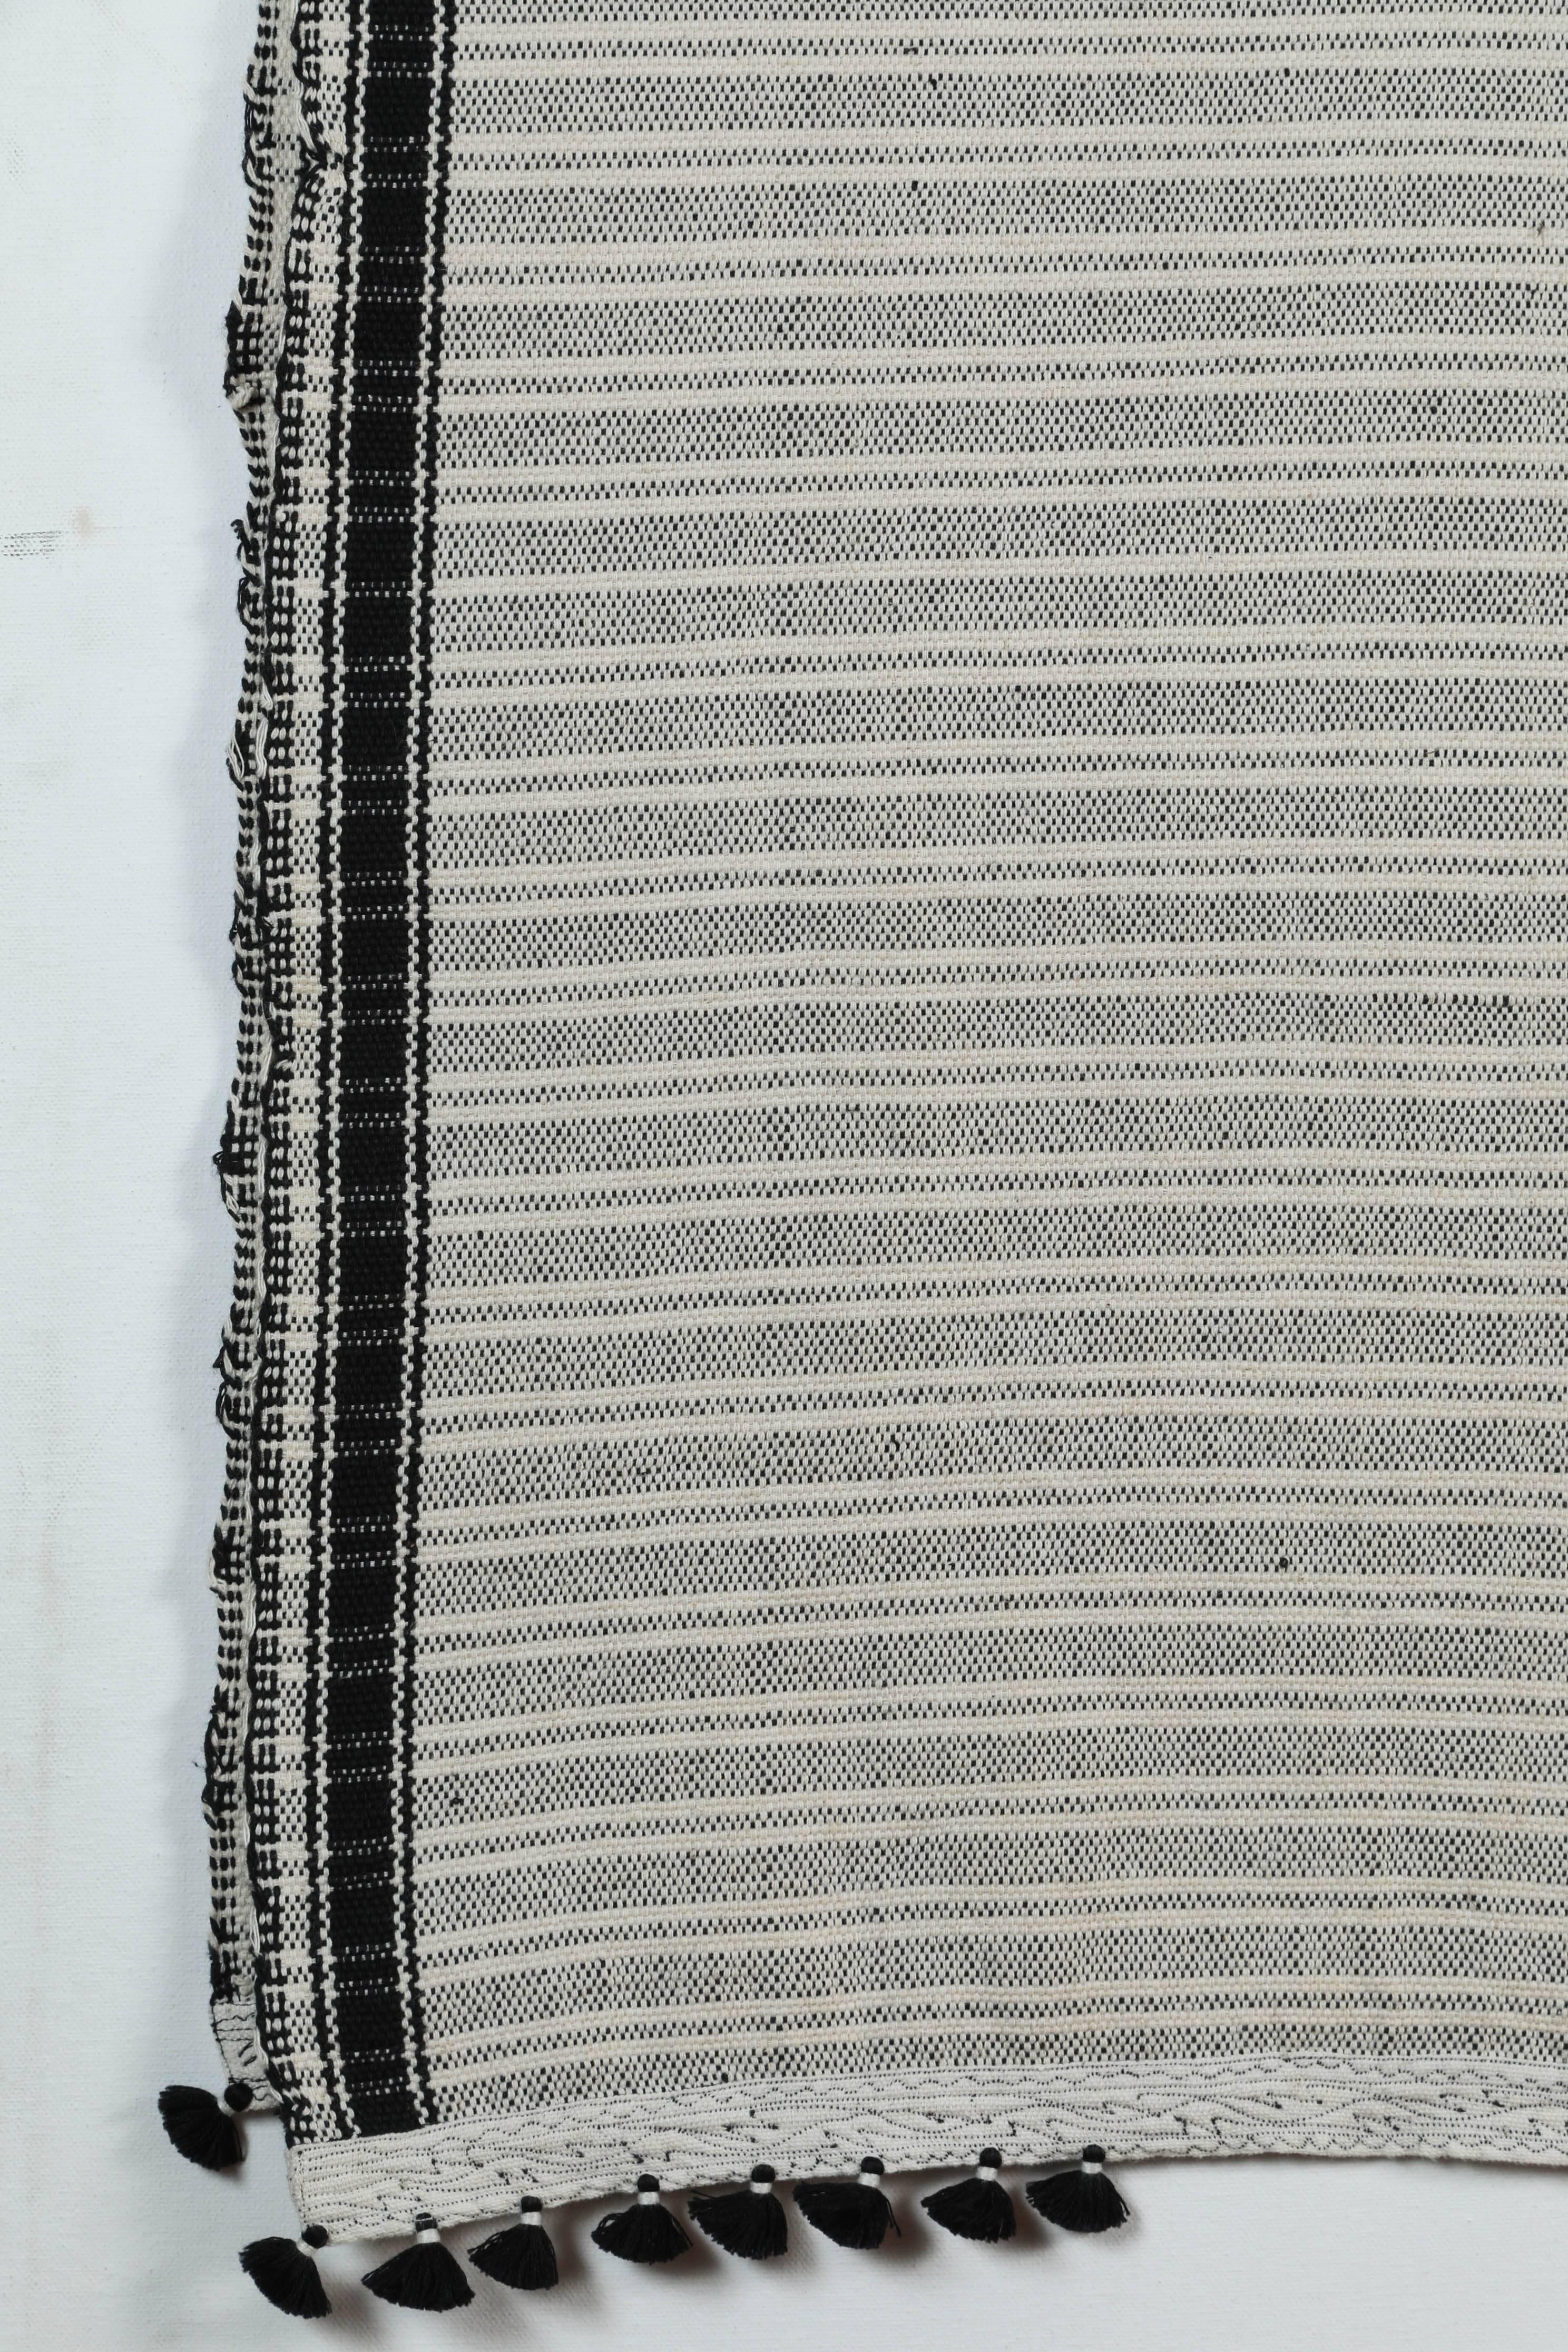 Kala naturally dyed organic cotton from Gujarat, India. Hand-loomed using traditional Indian textile techniques to produce extra weft woven stripes and plaids. This black and white bedcover has added hand-knotted tassels.